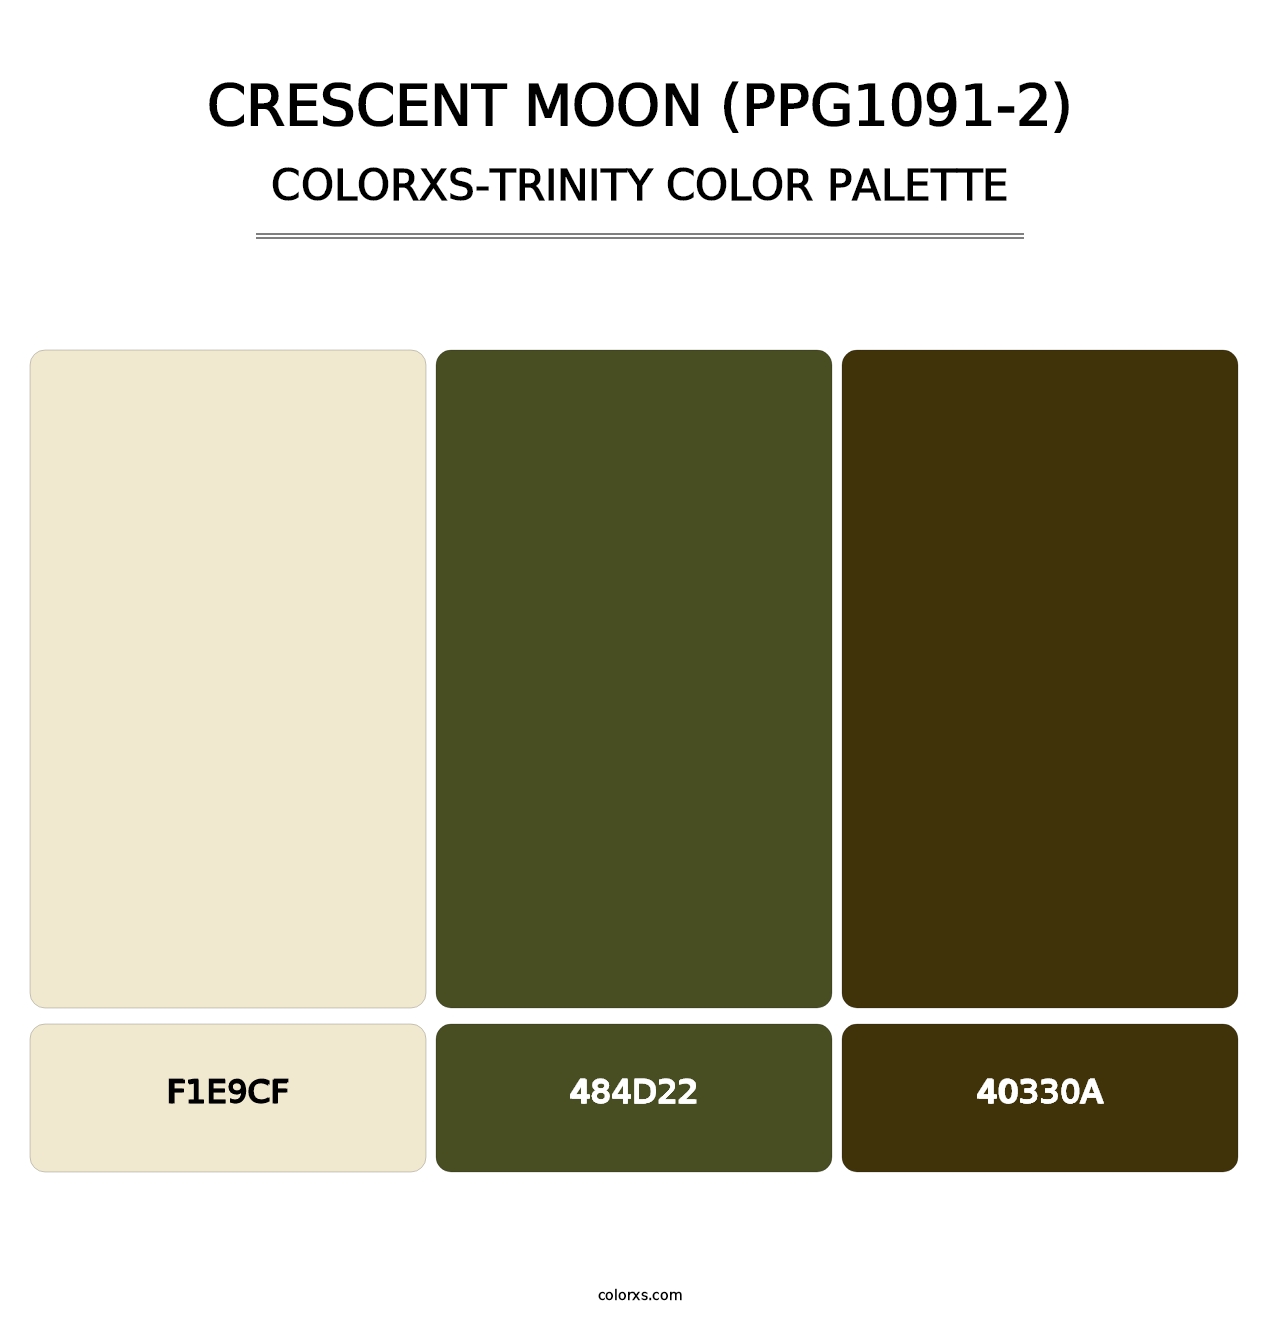 Crescent Moon (PPG1091-2) - Colorxs Trinity Palette